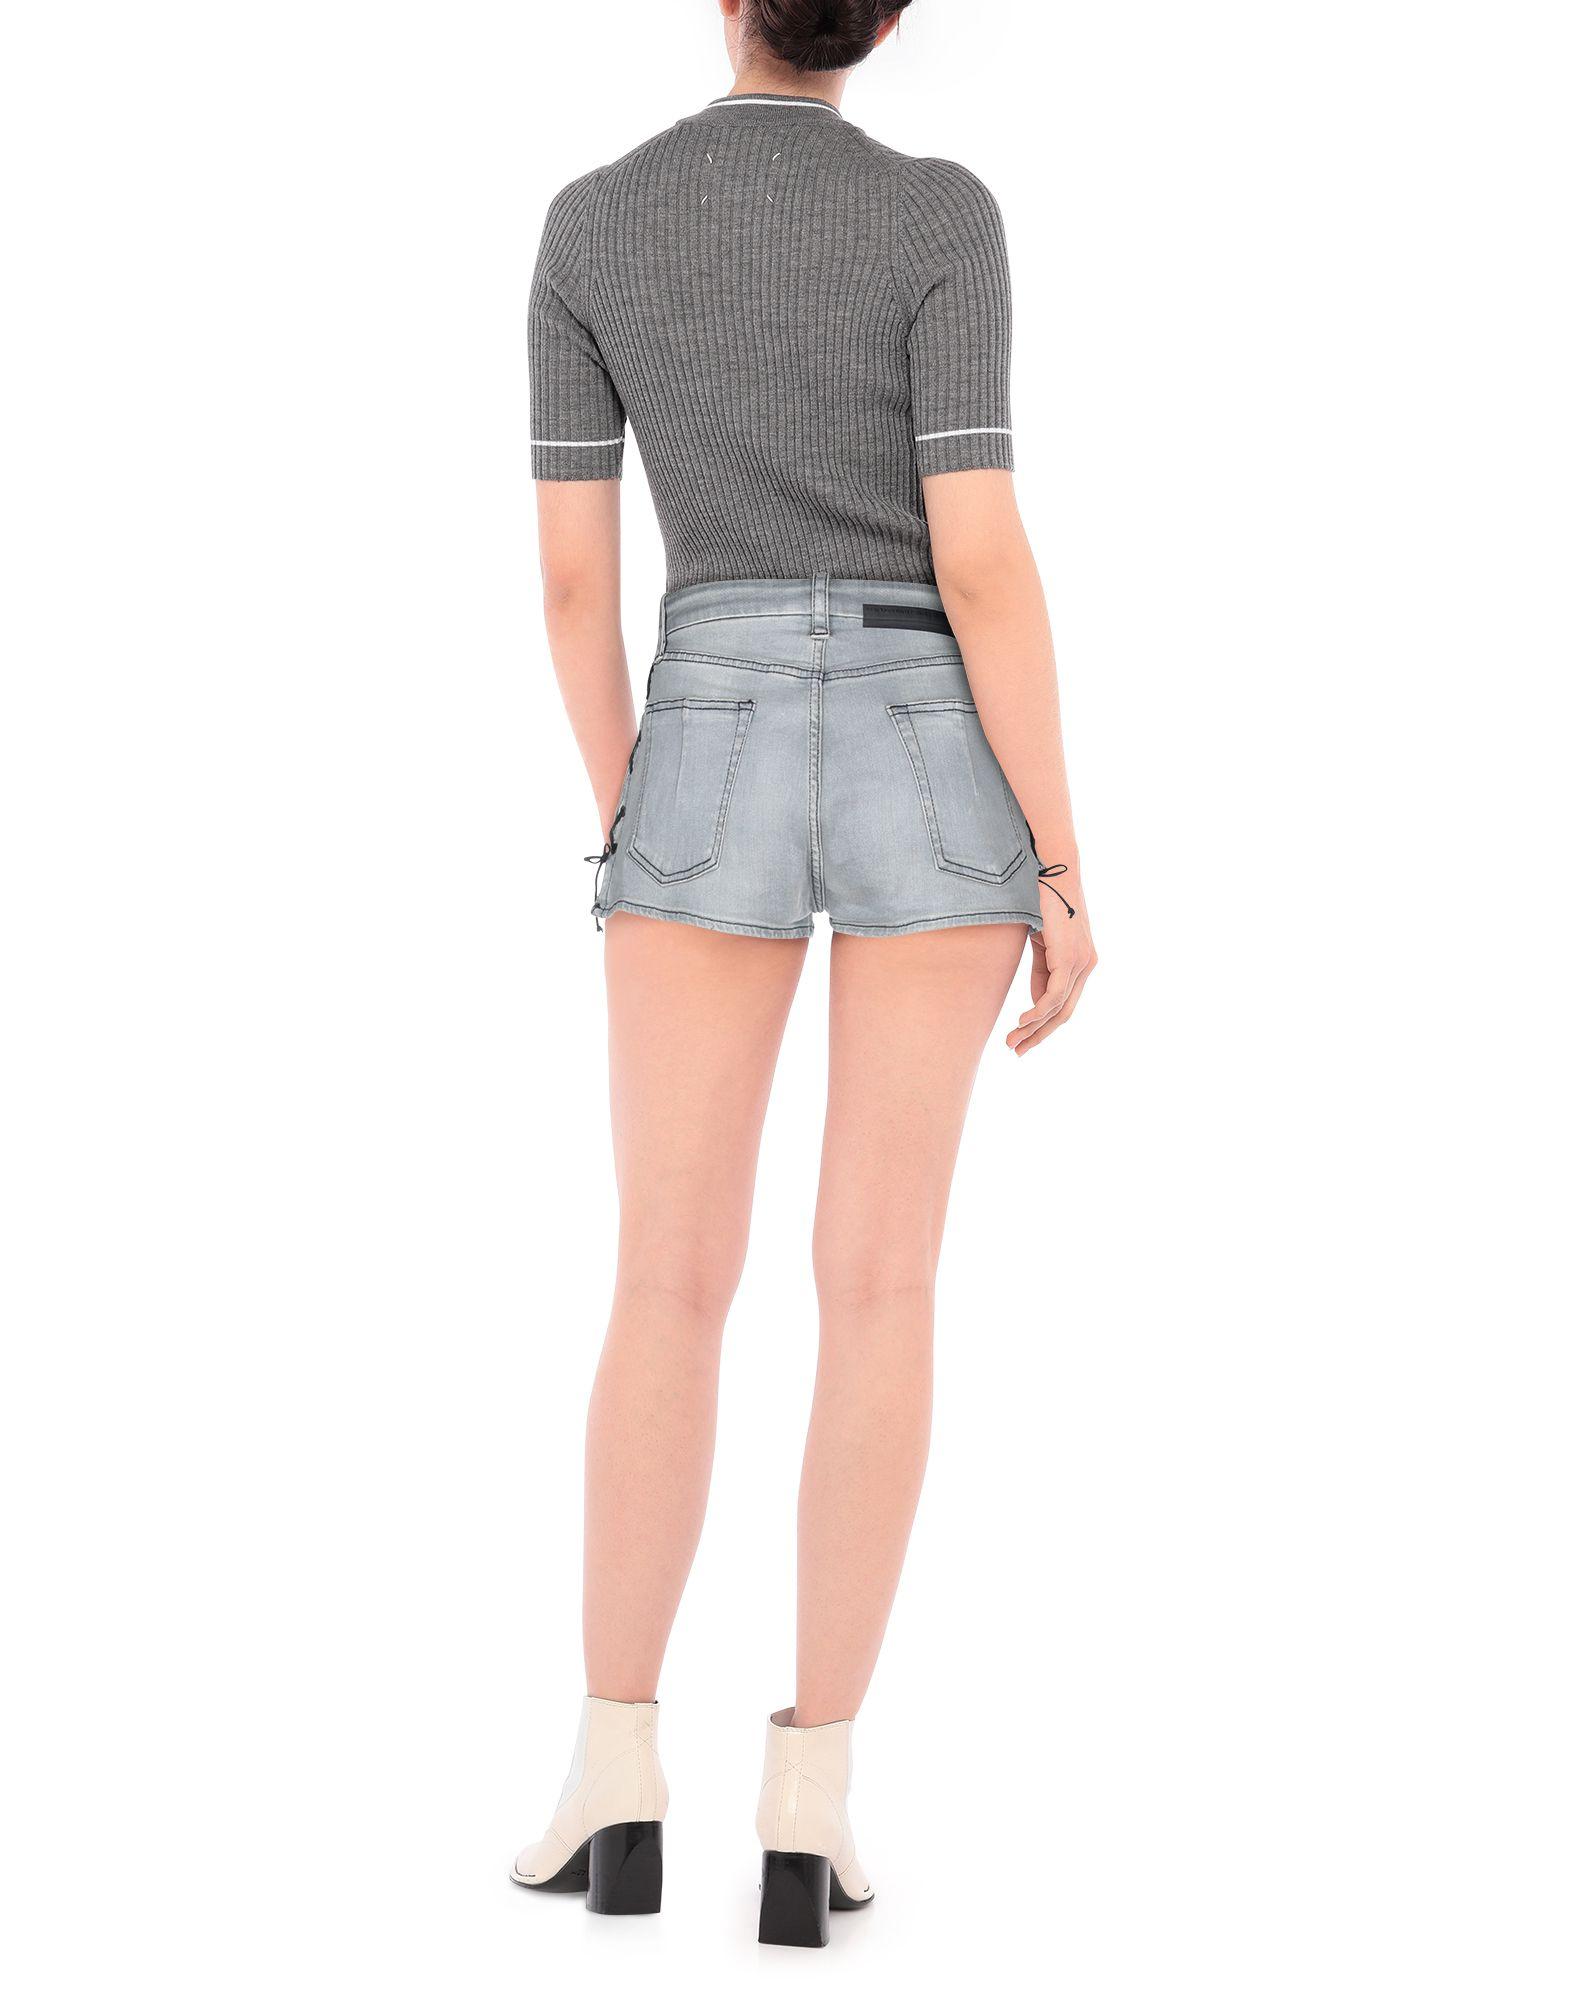 Unravel Project Denim Shorts in Grey (Gray) - Lyst